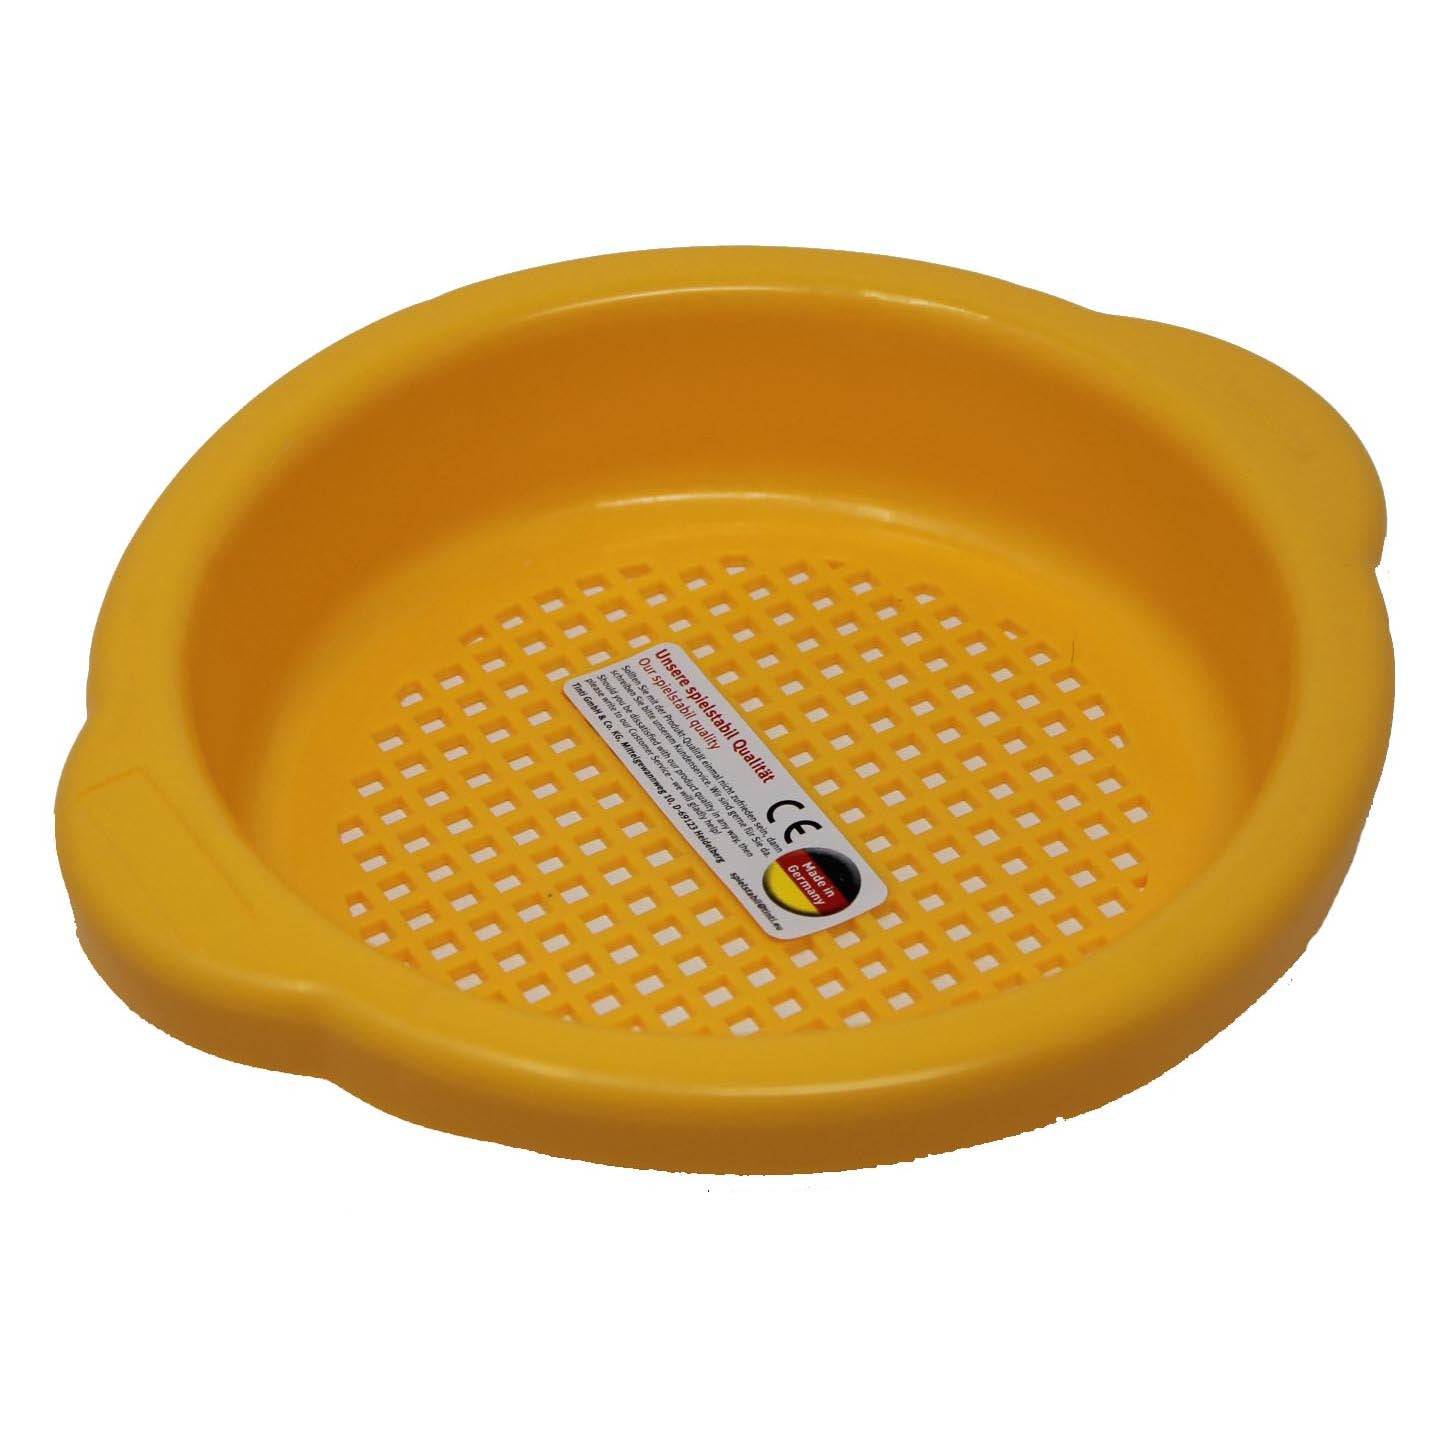 HABA USA - Spielstabil Sand Sieve Small (assorted colors)